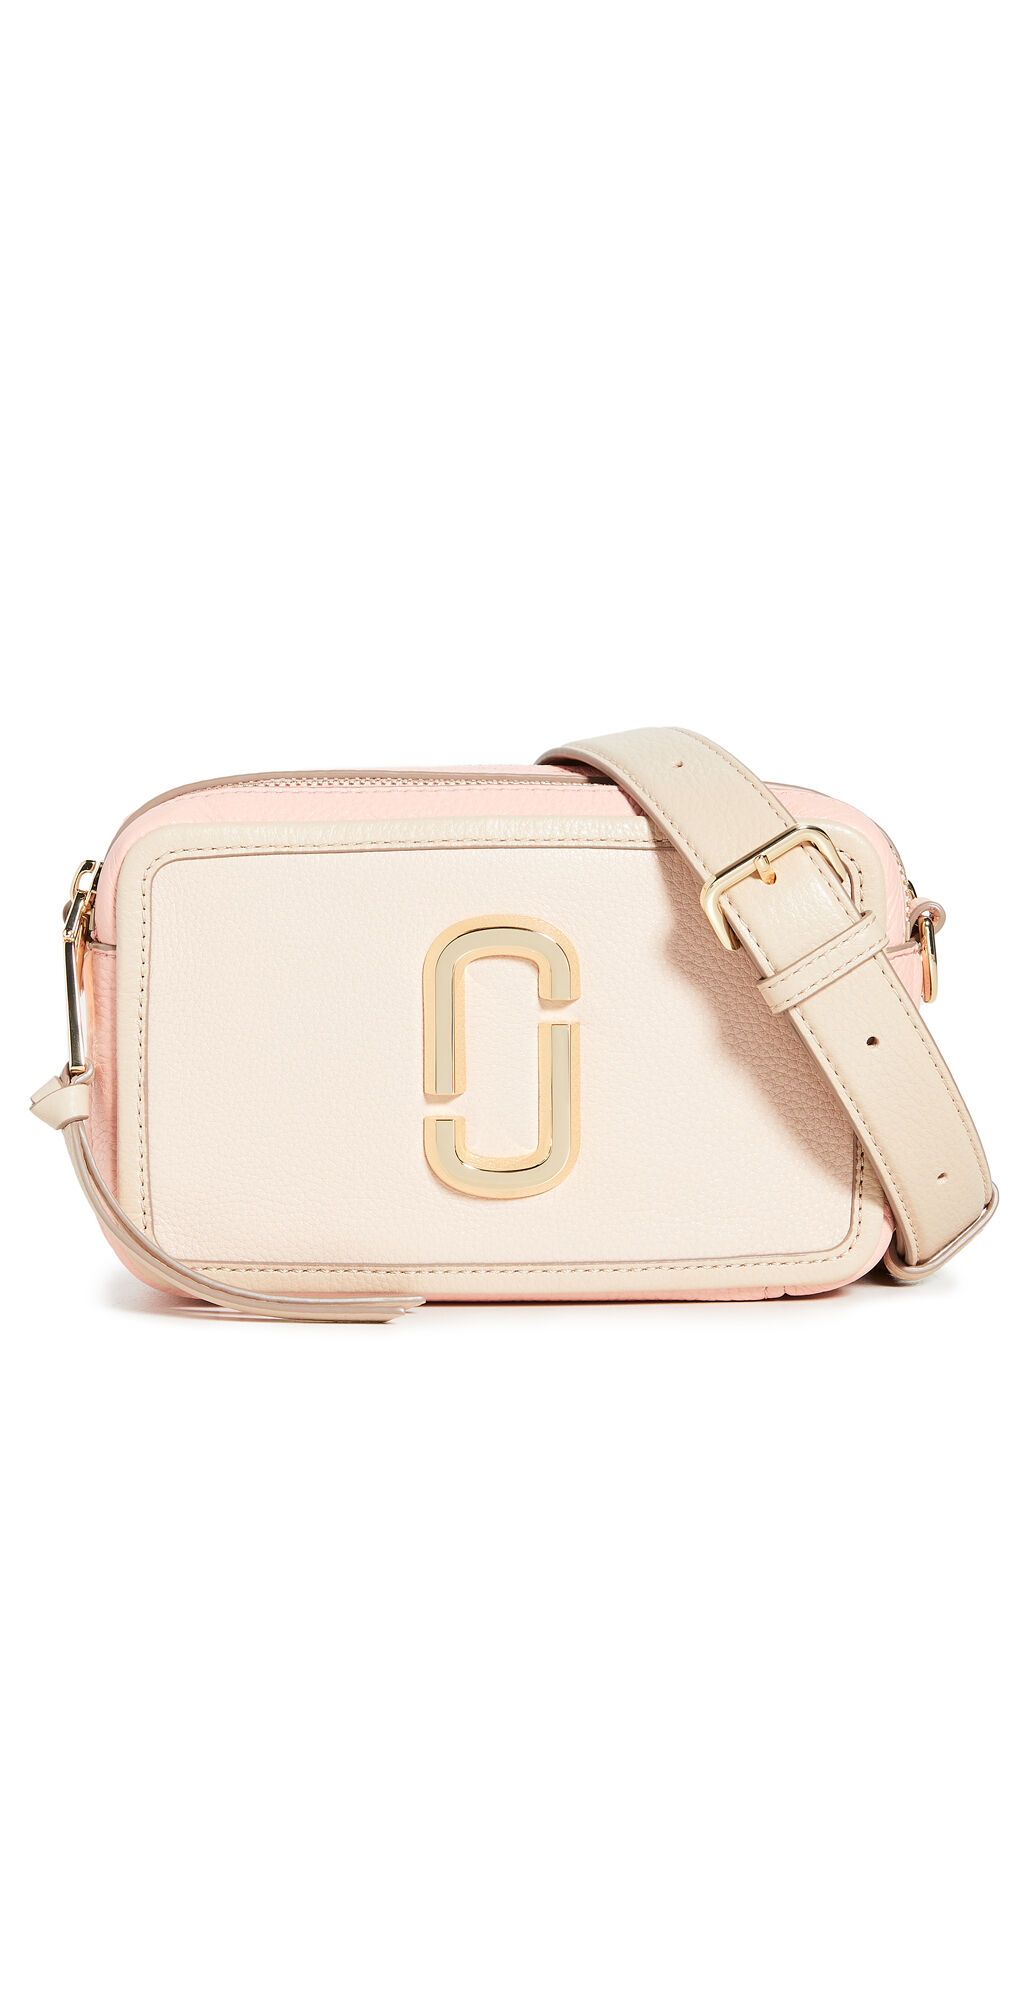 The Marc Jacobs The Softshot 21 Bag Apricot Beige Multi One Size  Apricot Beige Multi  size:One Size